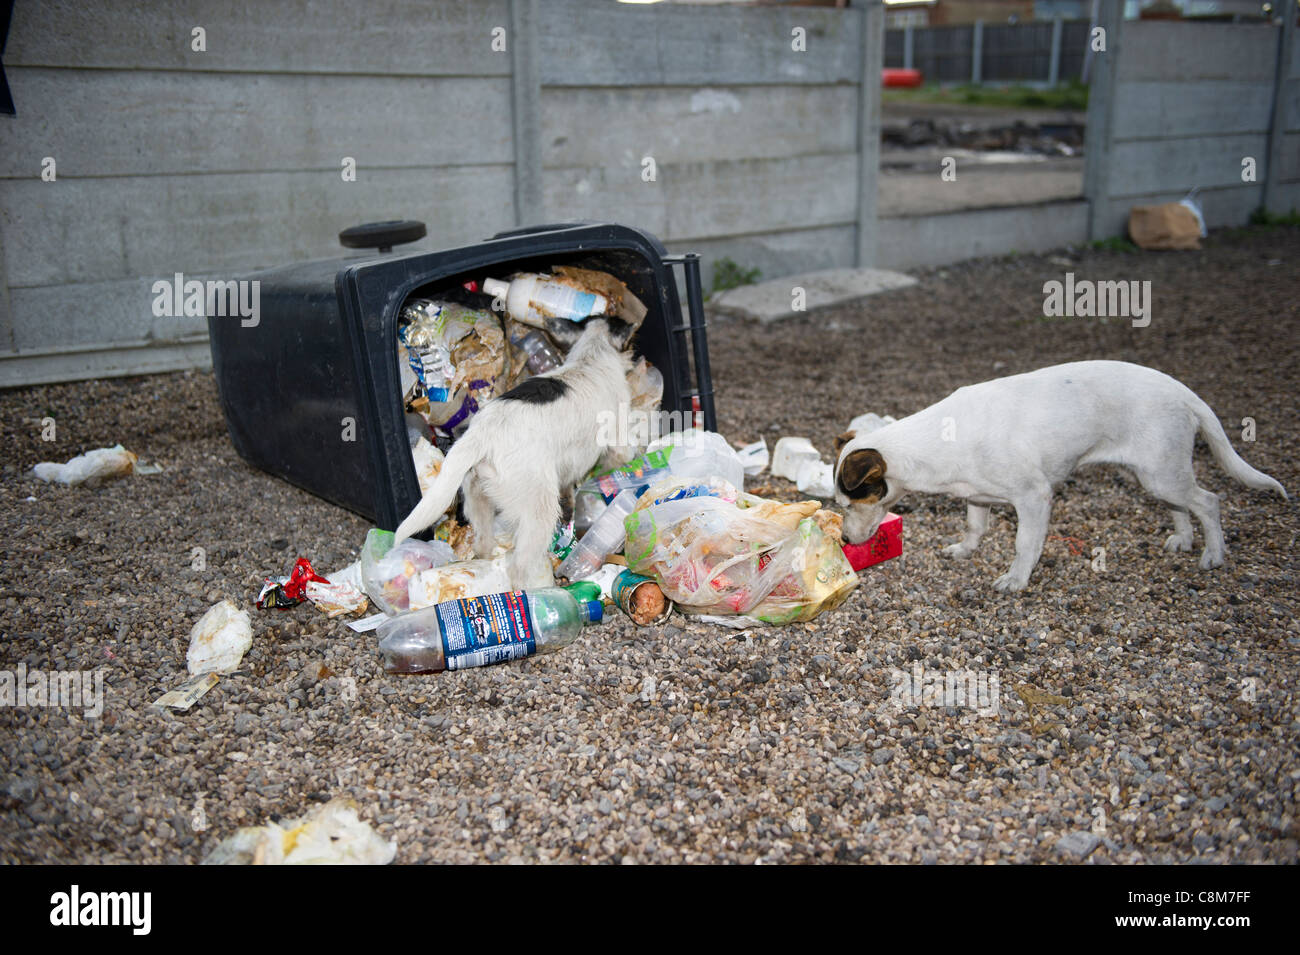 Two small terrier type dogs scavenging around a wheely bin full of food and waste that has been knocked over and spilled out. Stock Photo